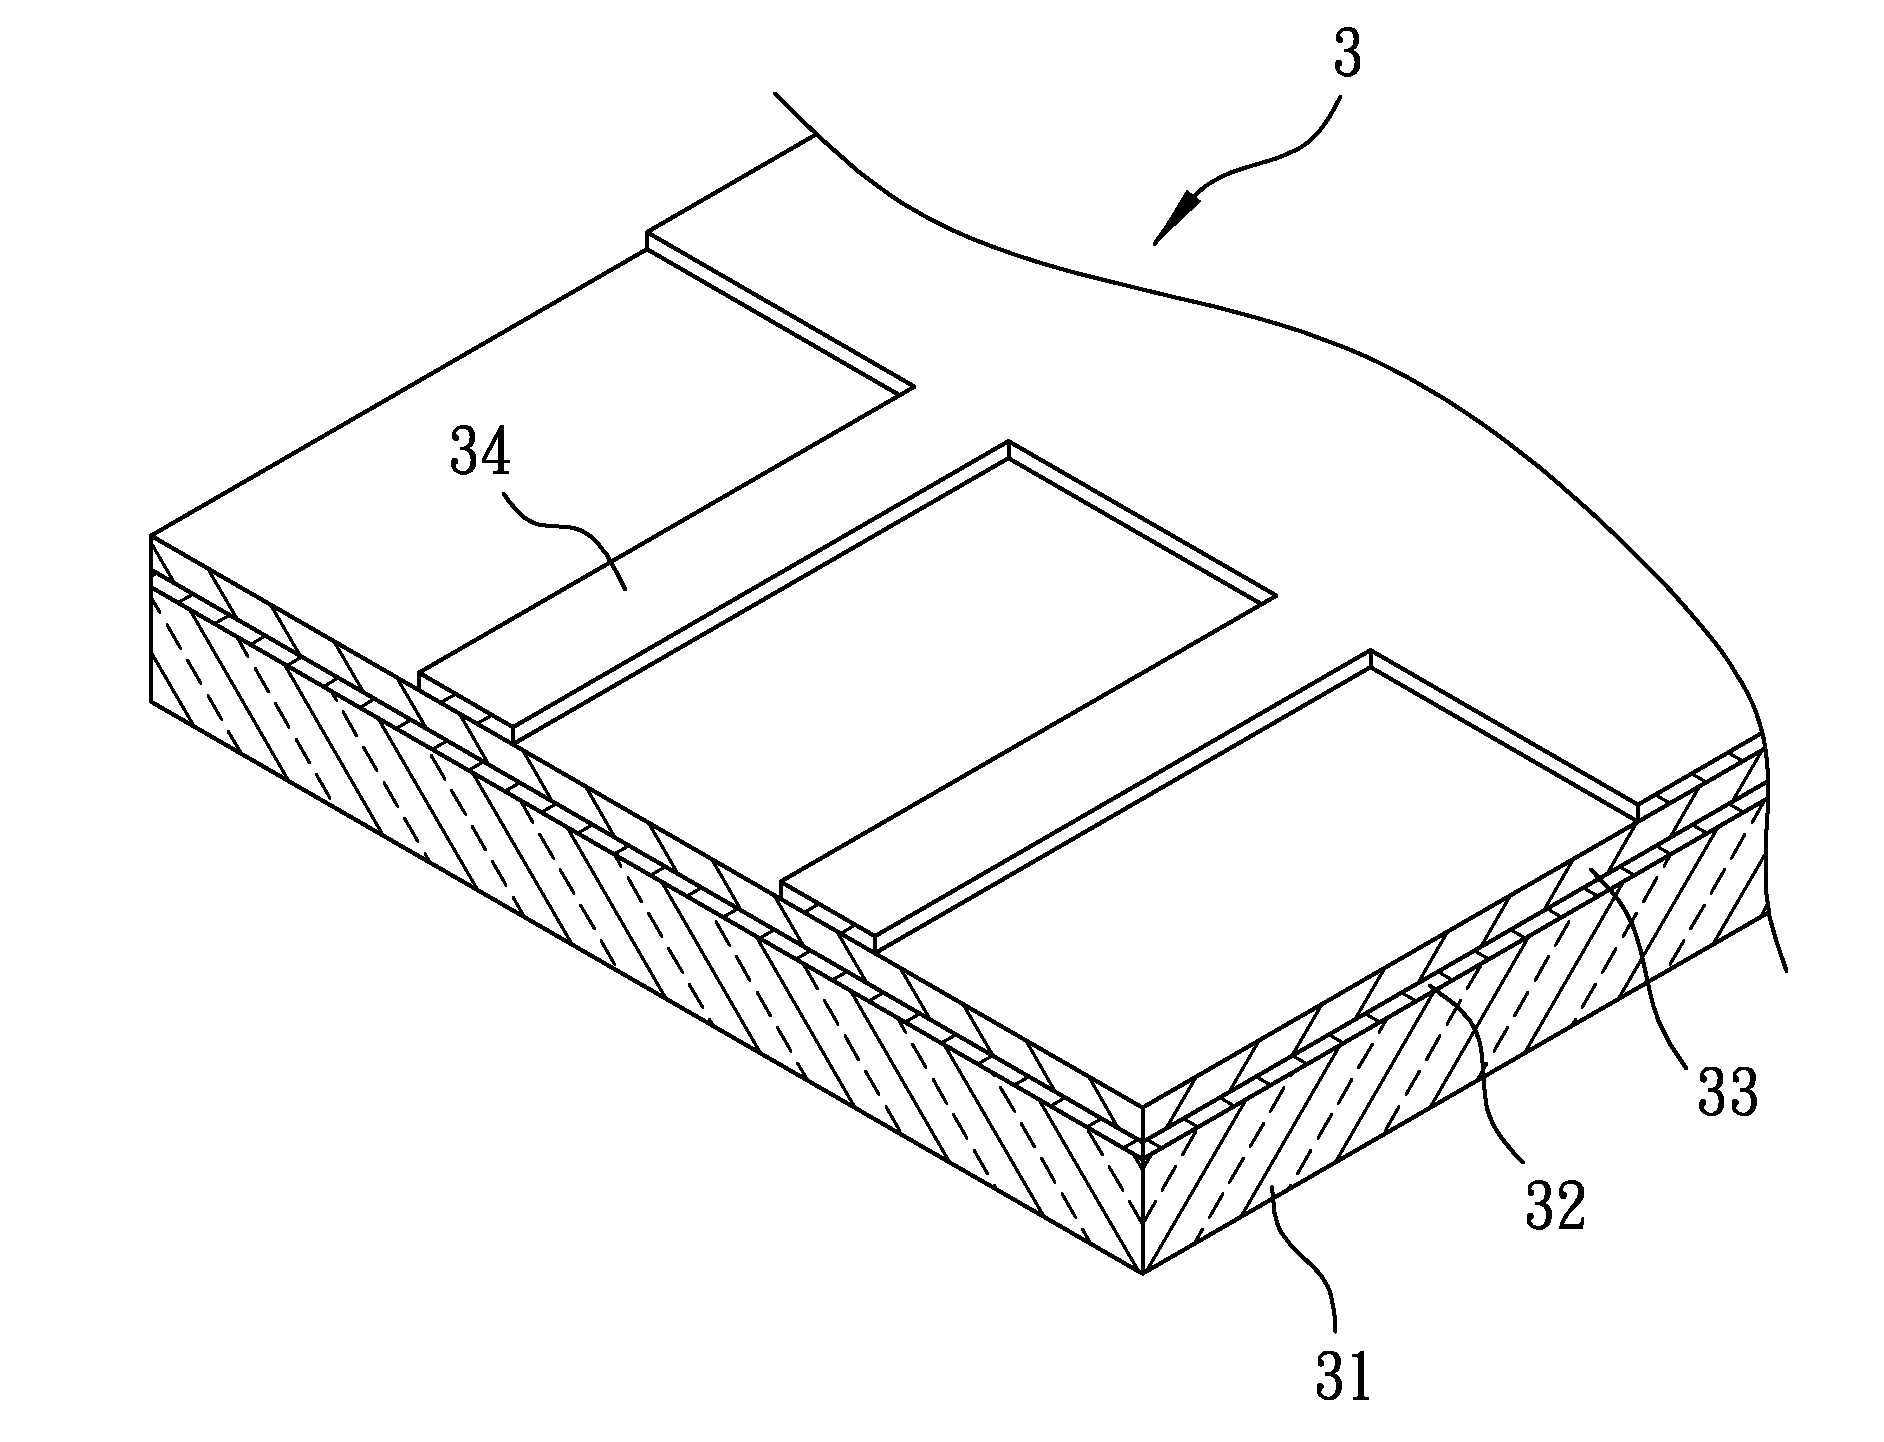 Target for a sputtering process for making a compound film layer of a thin solar cell, method of making the thin film solar cell, and thin film solar cell made thereby